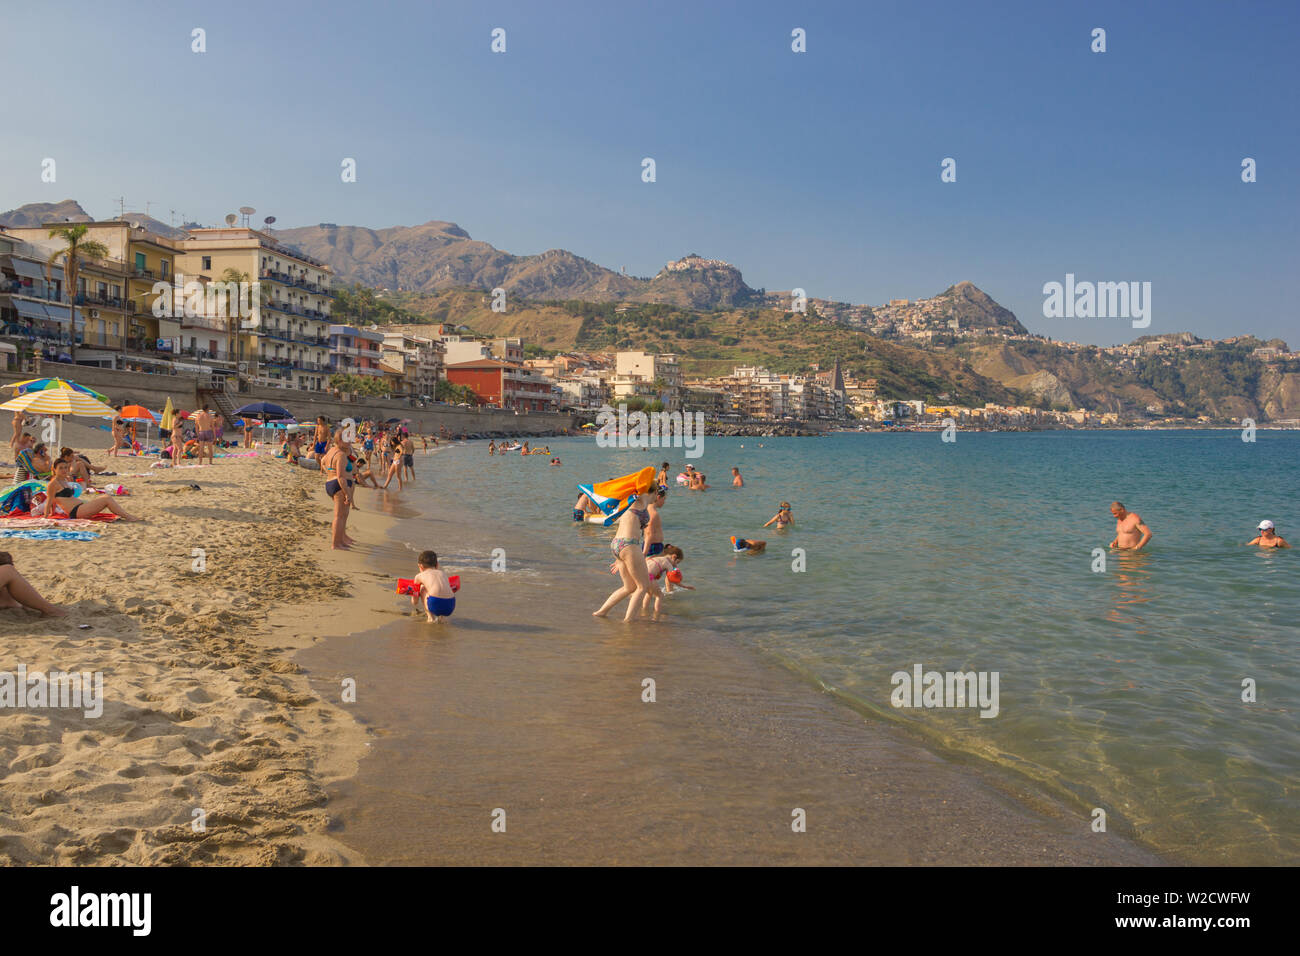 Giardini Naxos Sicily Italy 2019 Summer holiday beach with people playing and enjoying the sea, coastline and mountains Stock Photo